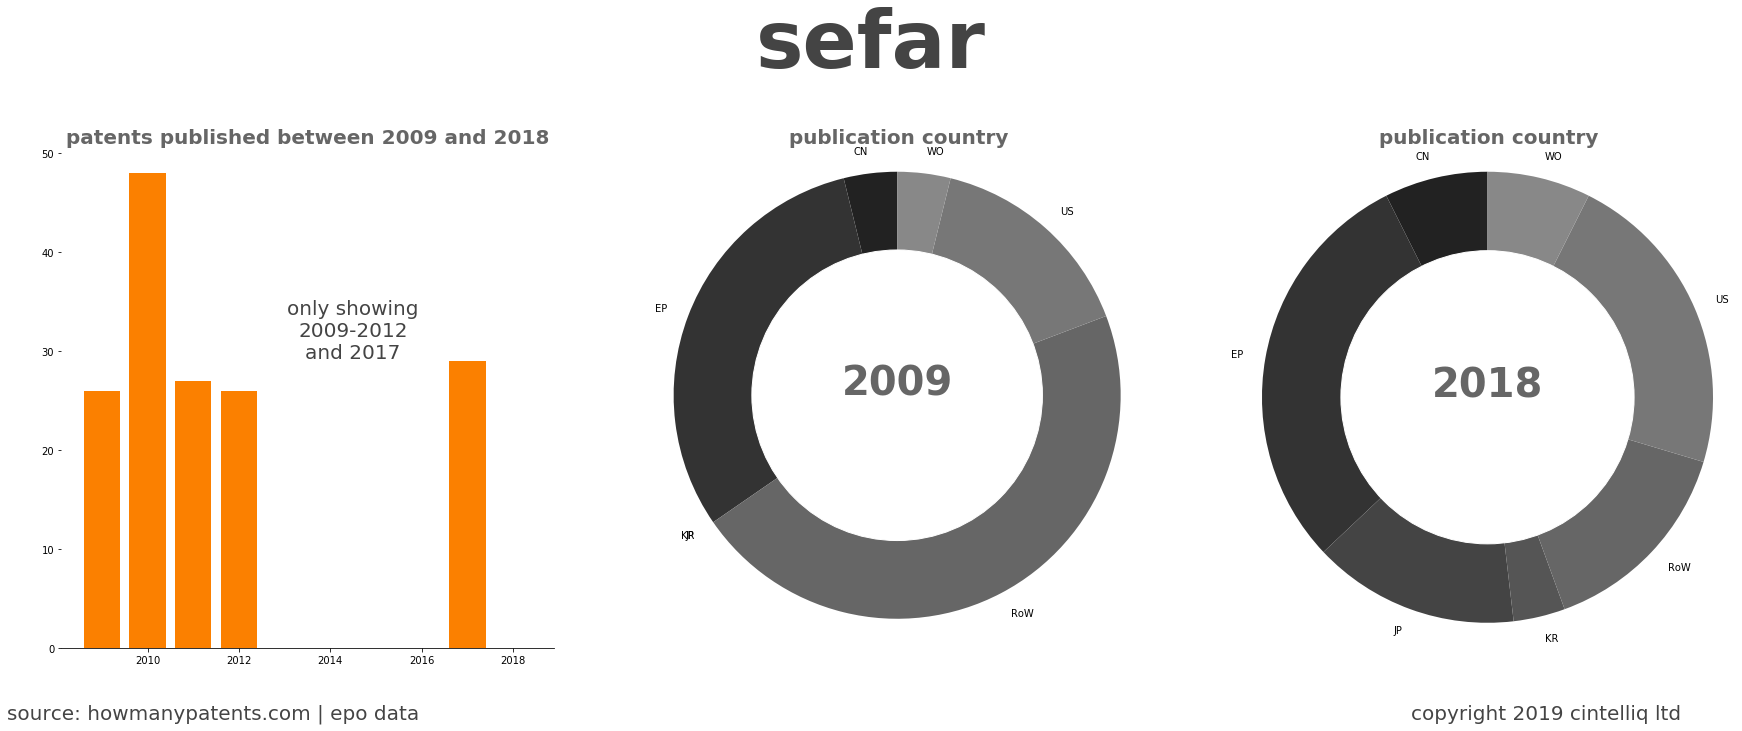 summary of patents for Sefar